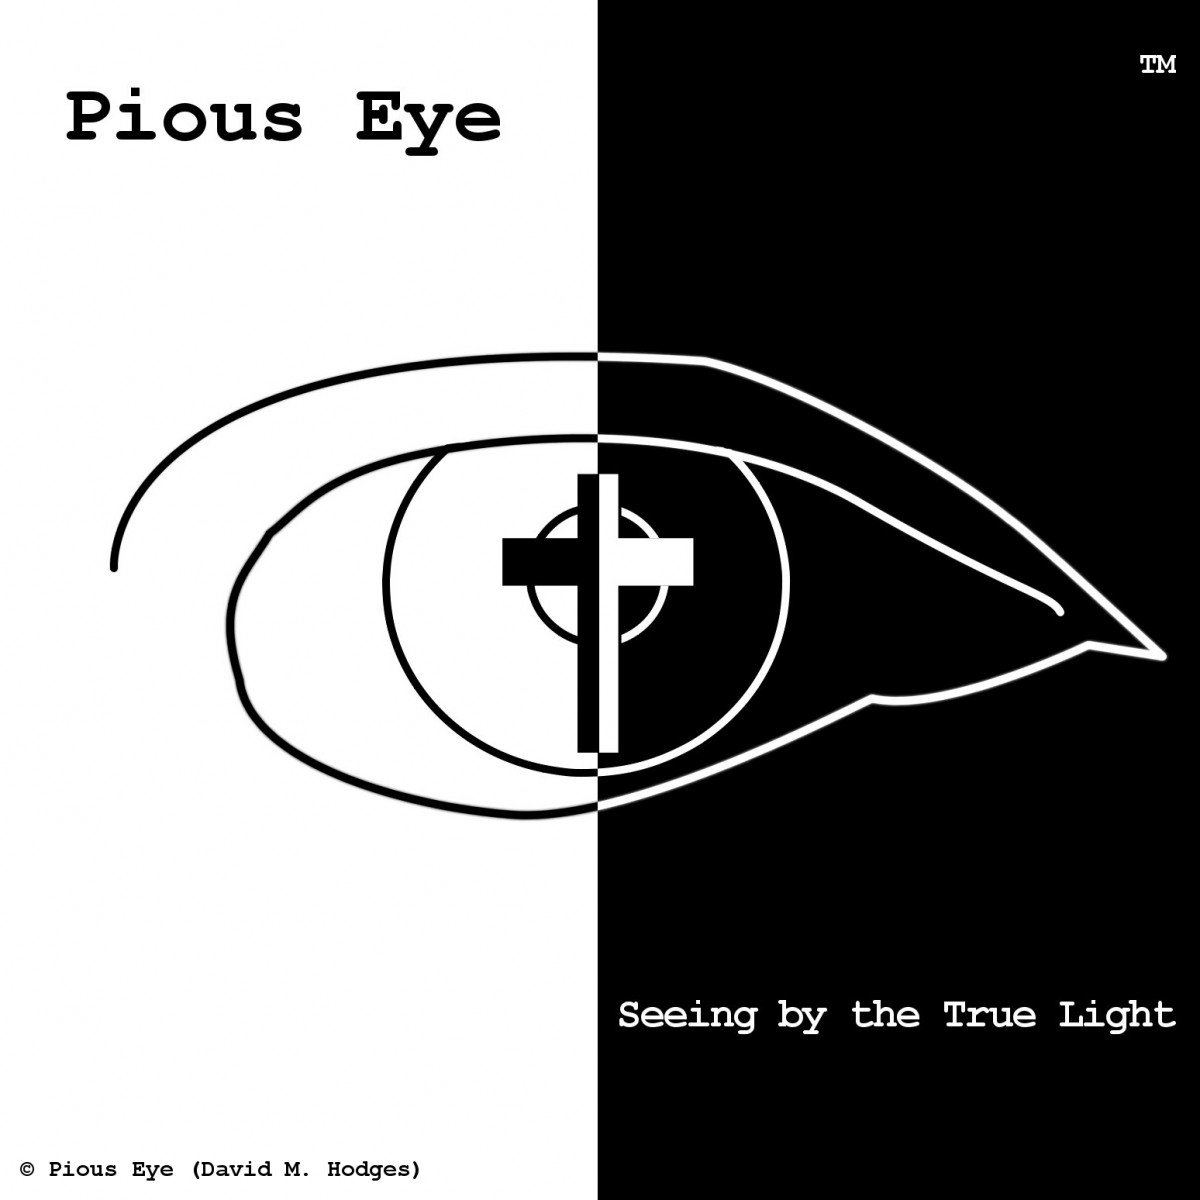 Just updated the Pious Eye usage notes https://piouseye.com/usage-notes/